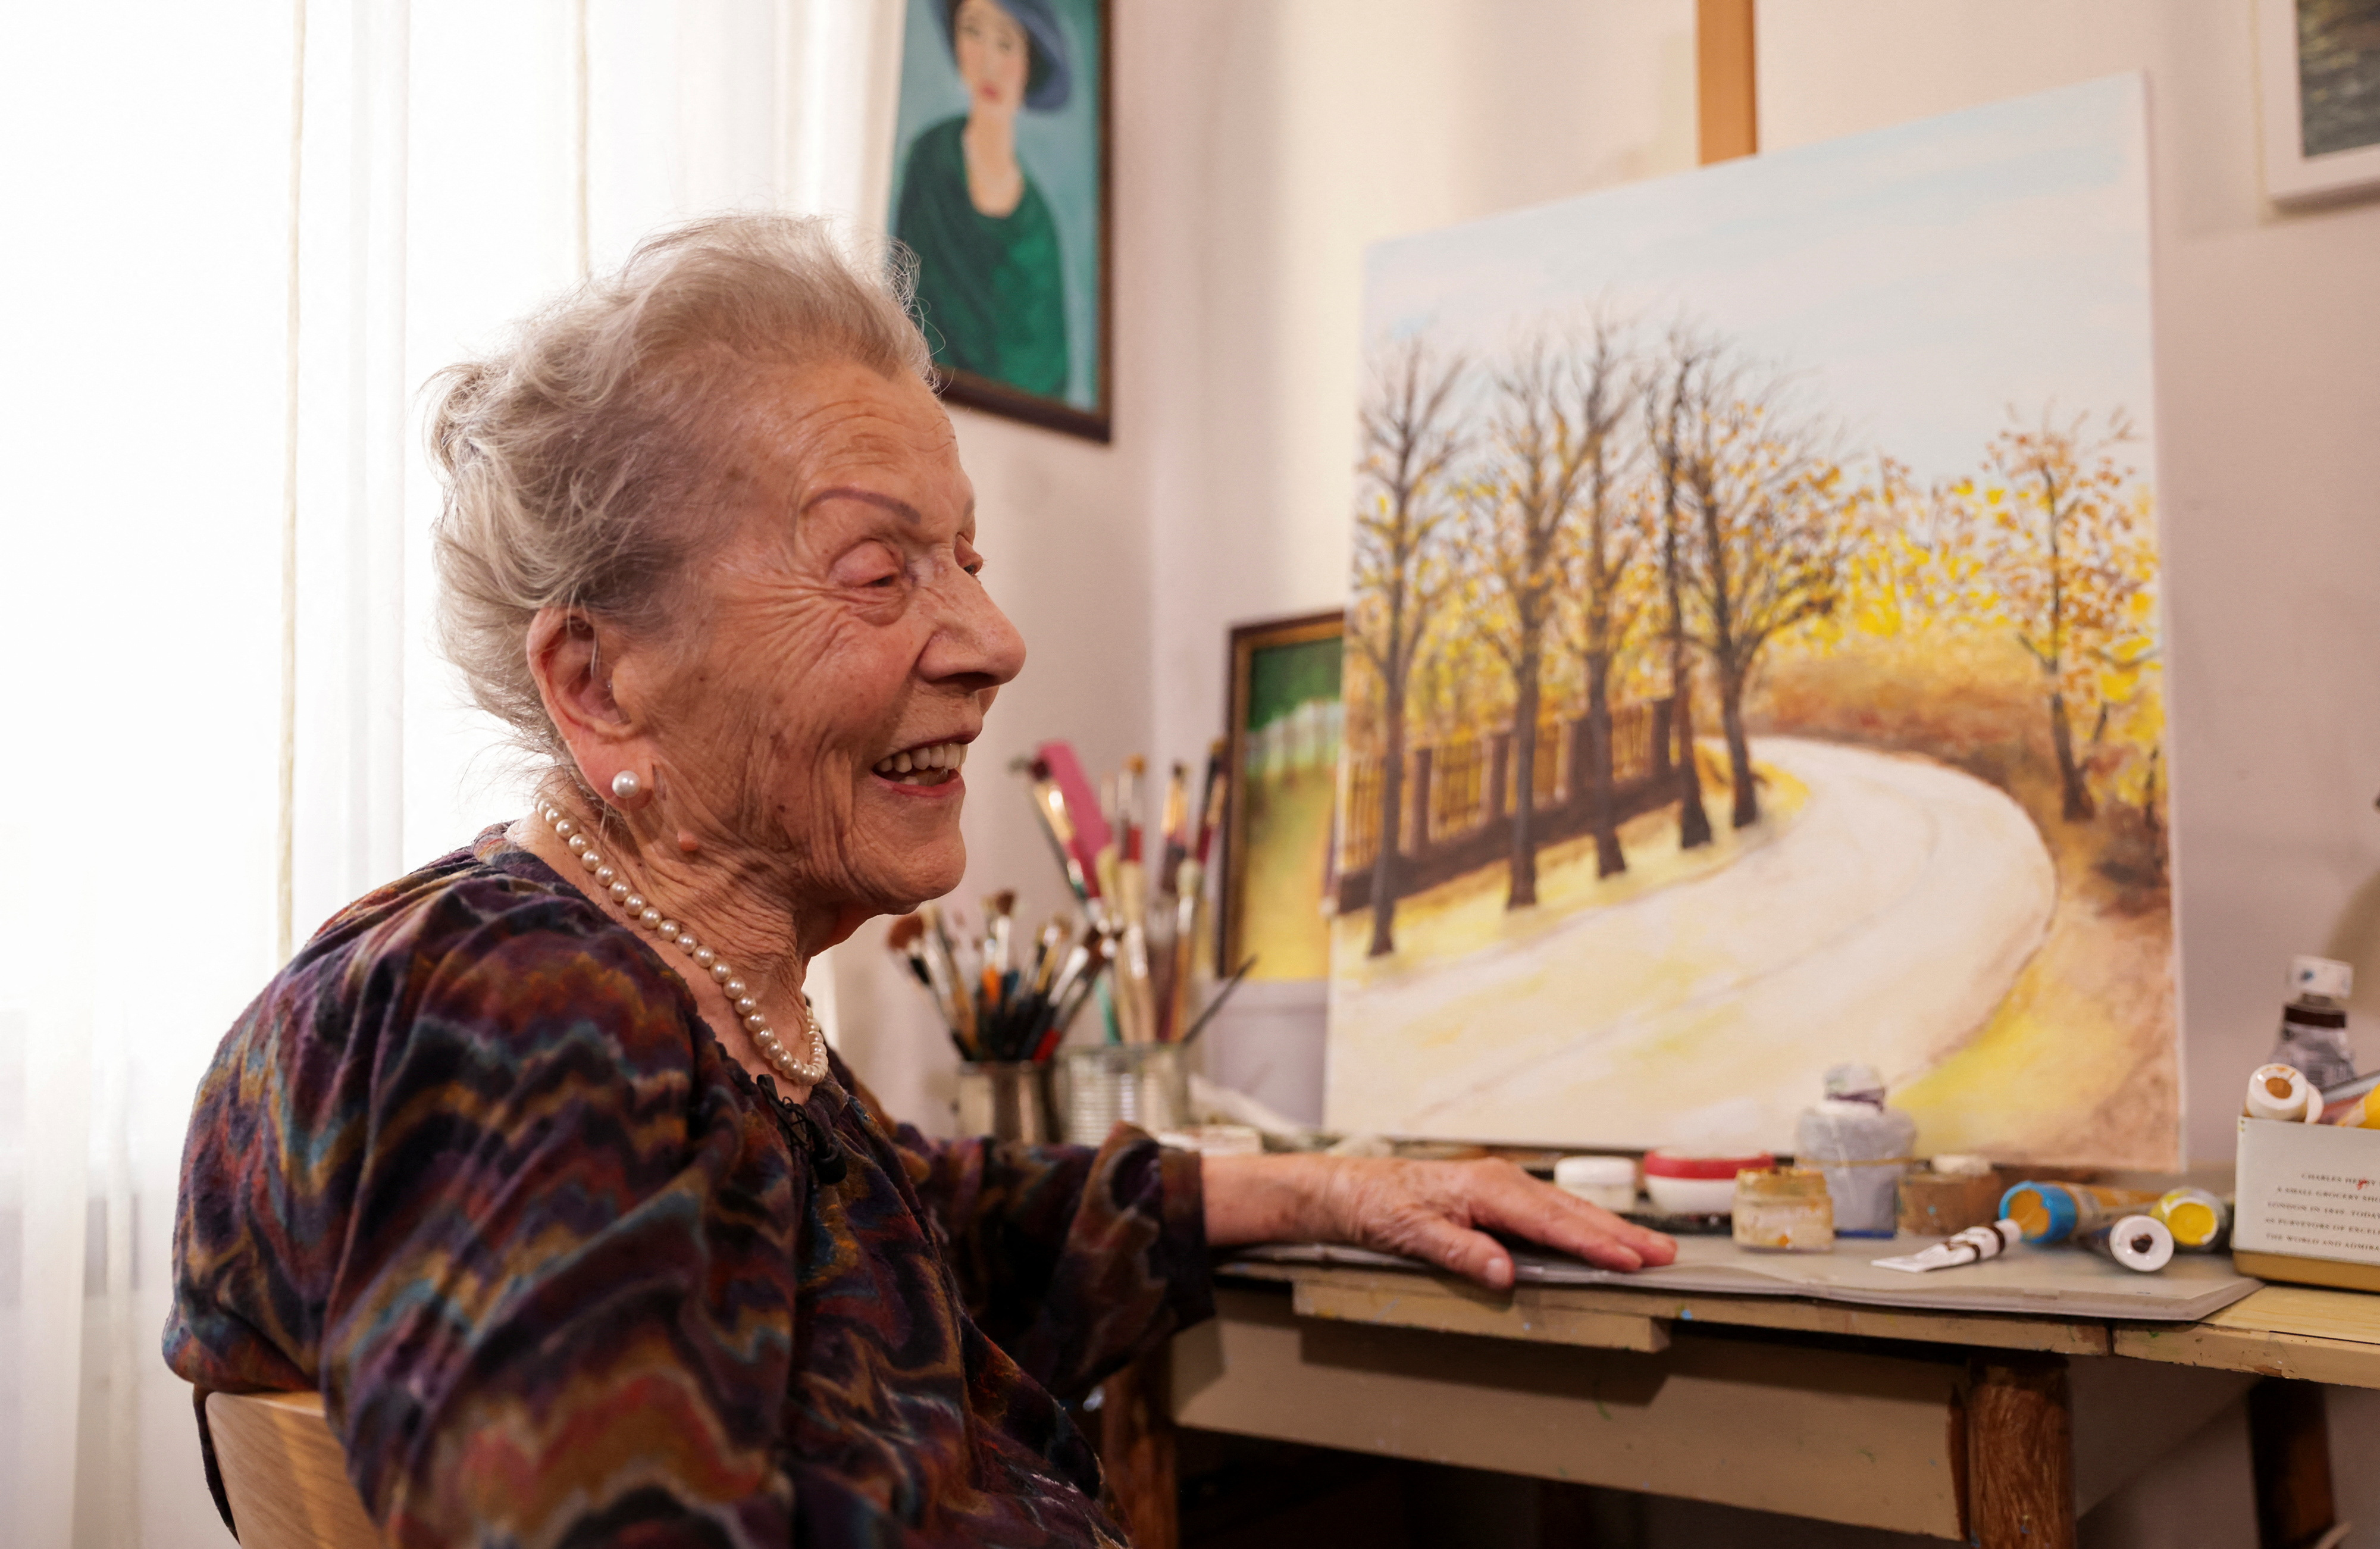 Nada Rudan, a 100-year-old self-taught Bosnian painter, in her home in Sarajevo